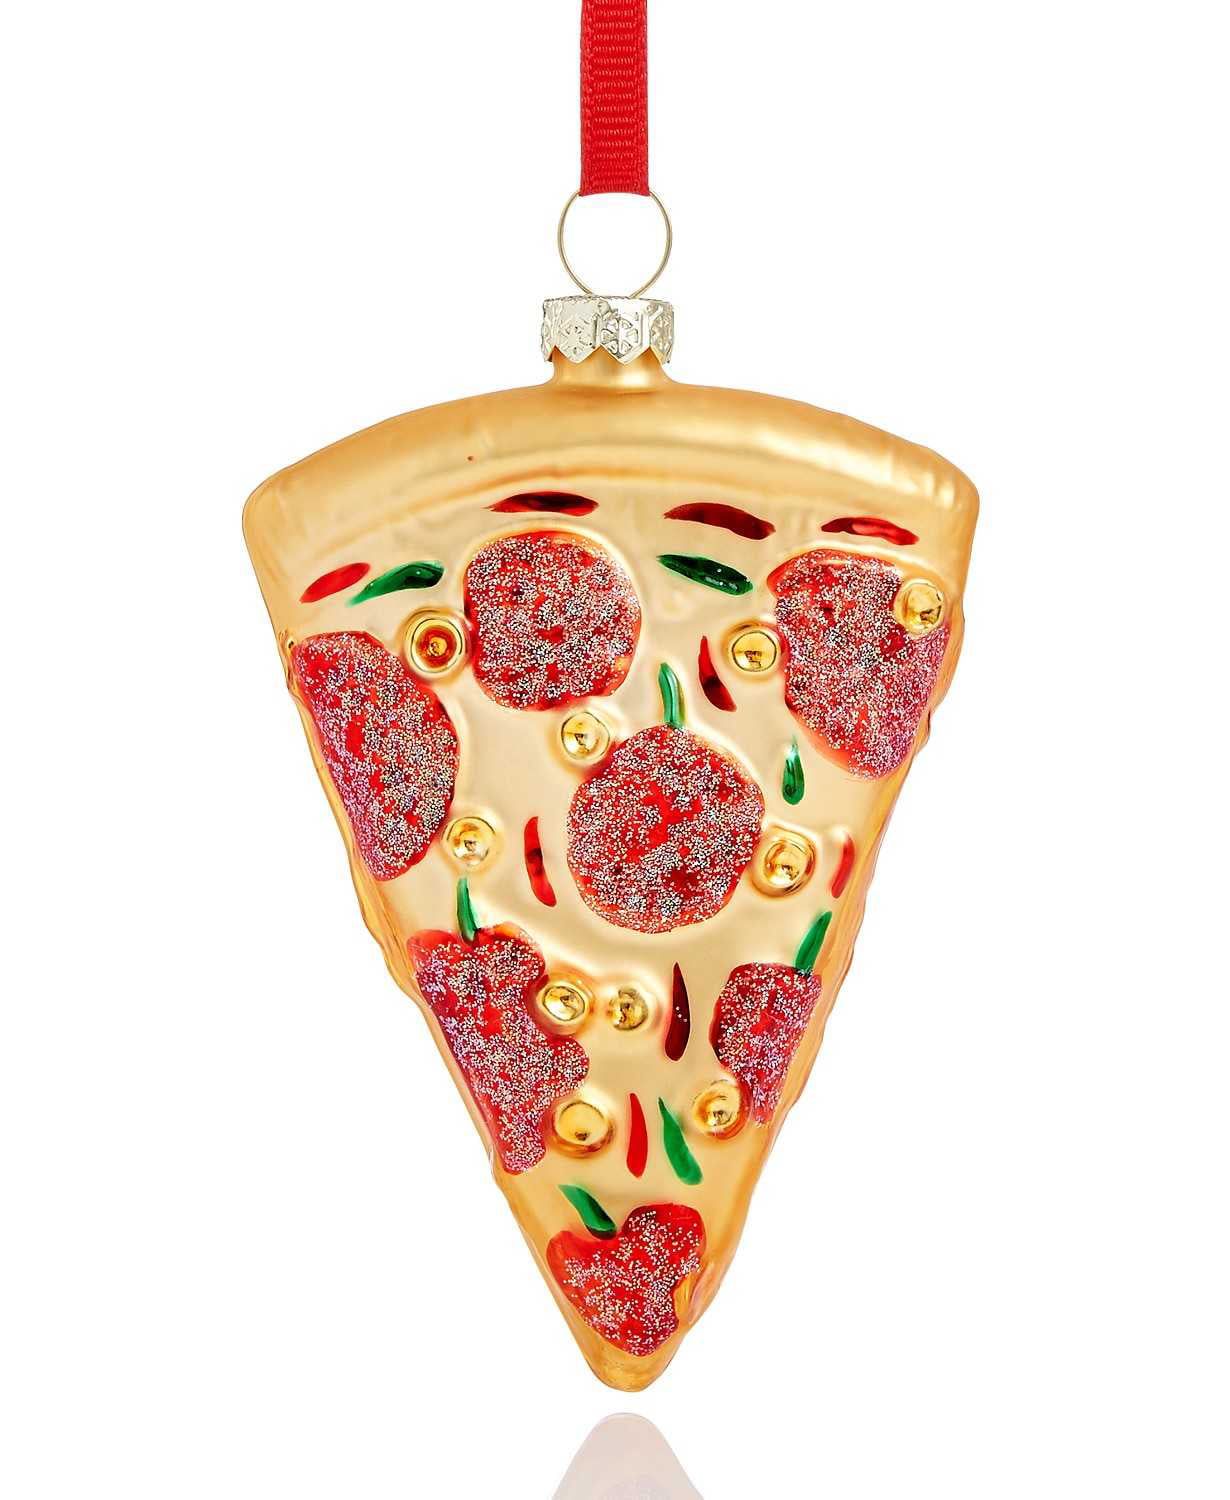 Details about   Hanging Pizza Slice Glass Christmas Tree Ornament Holiday Gift Topper Xmas Decor 